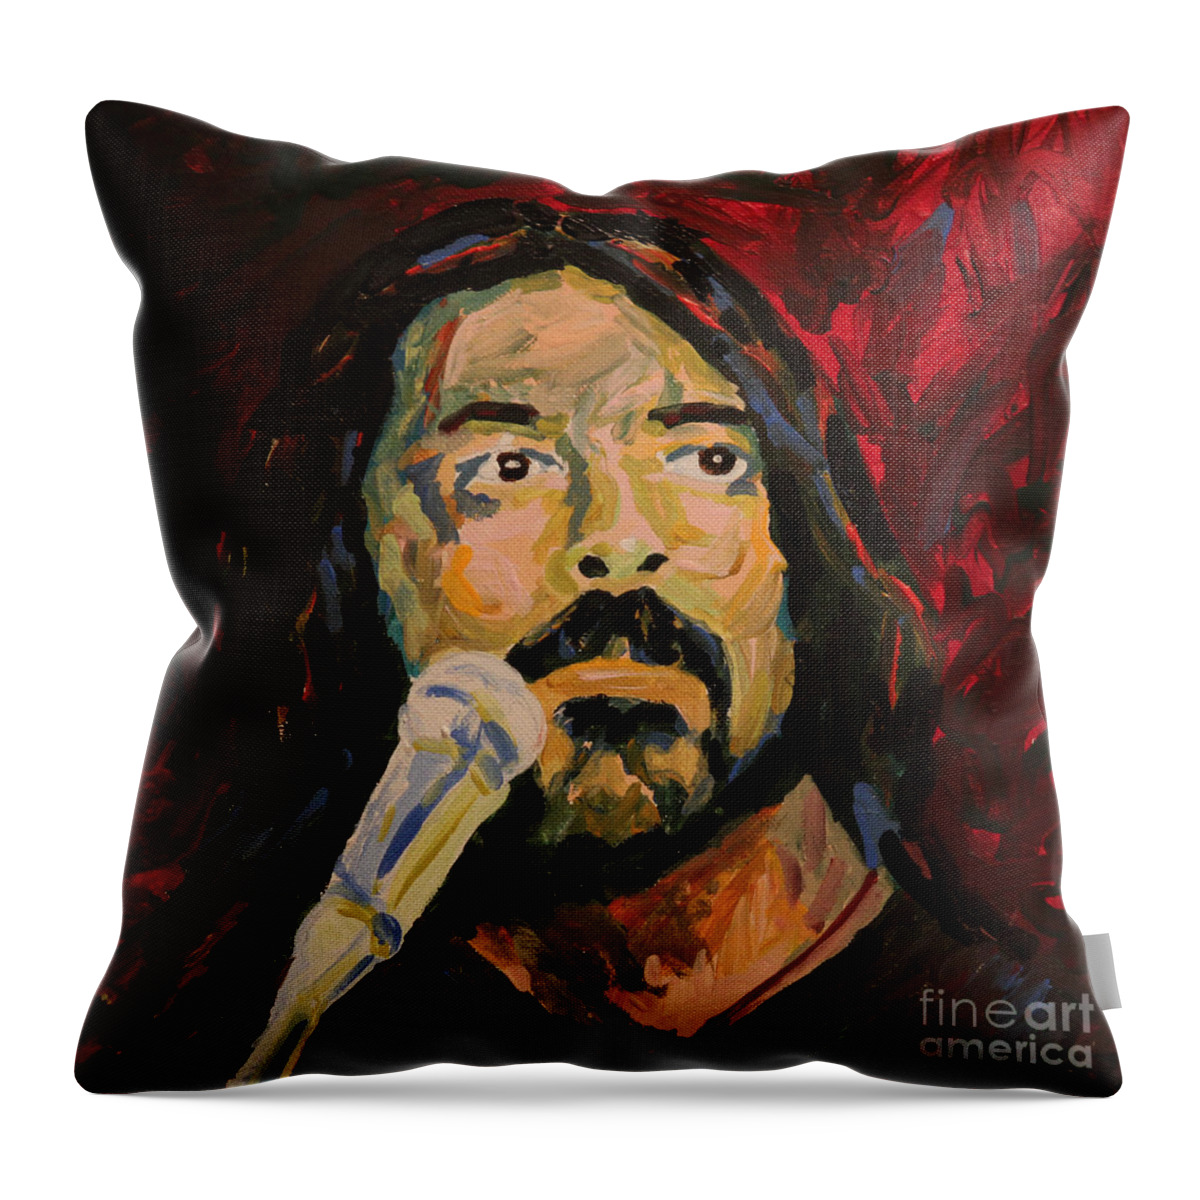 Dave Grohl Throw Pillow featuring the painting Dave Grohl Portrait by Robert Yaeger